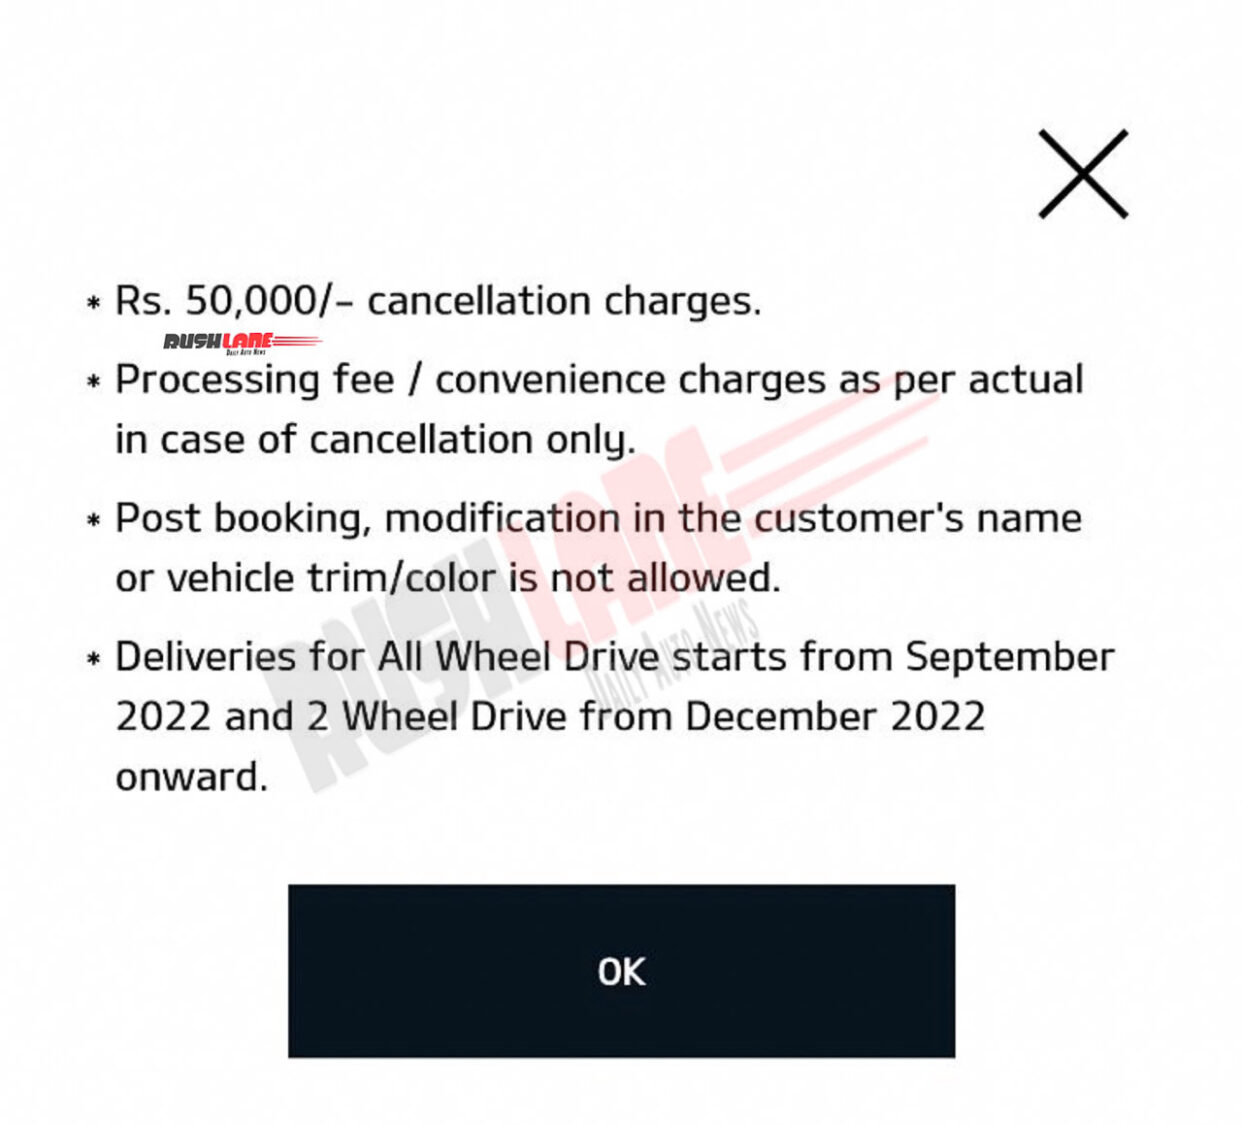 Kia EV6 cancellation charges Rs 50,000